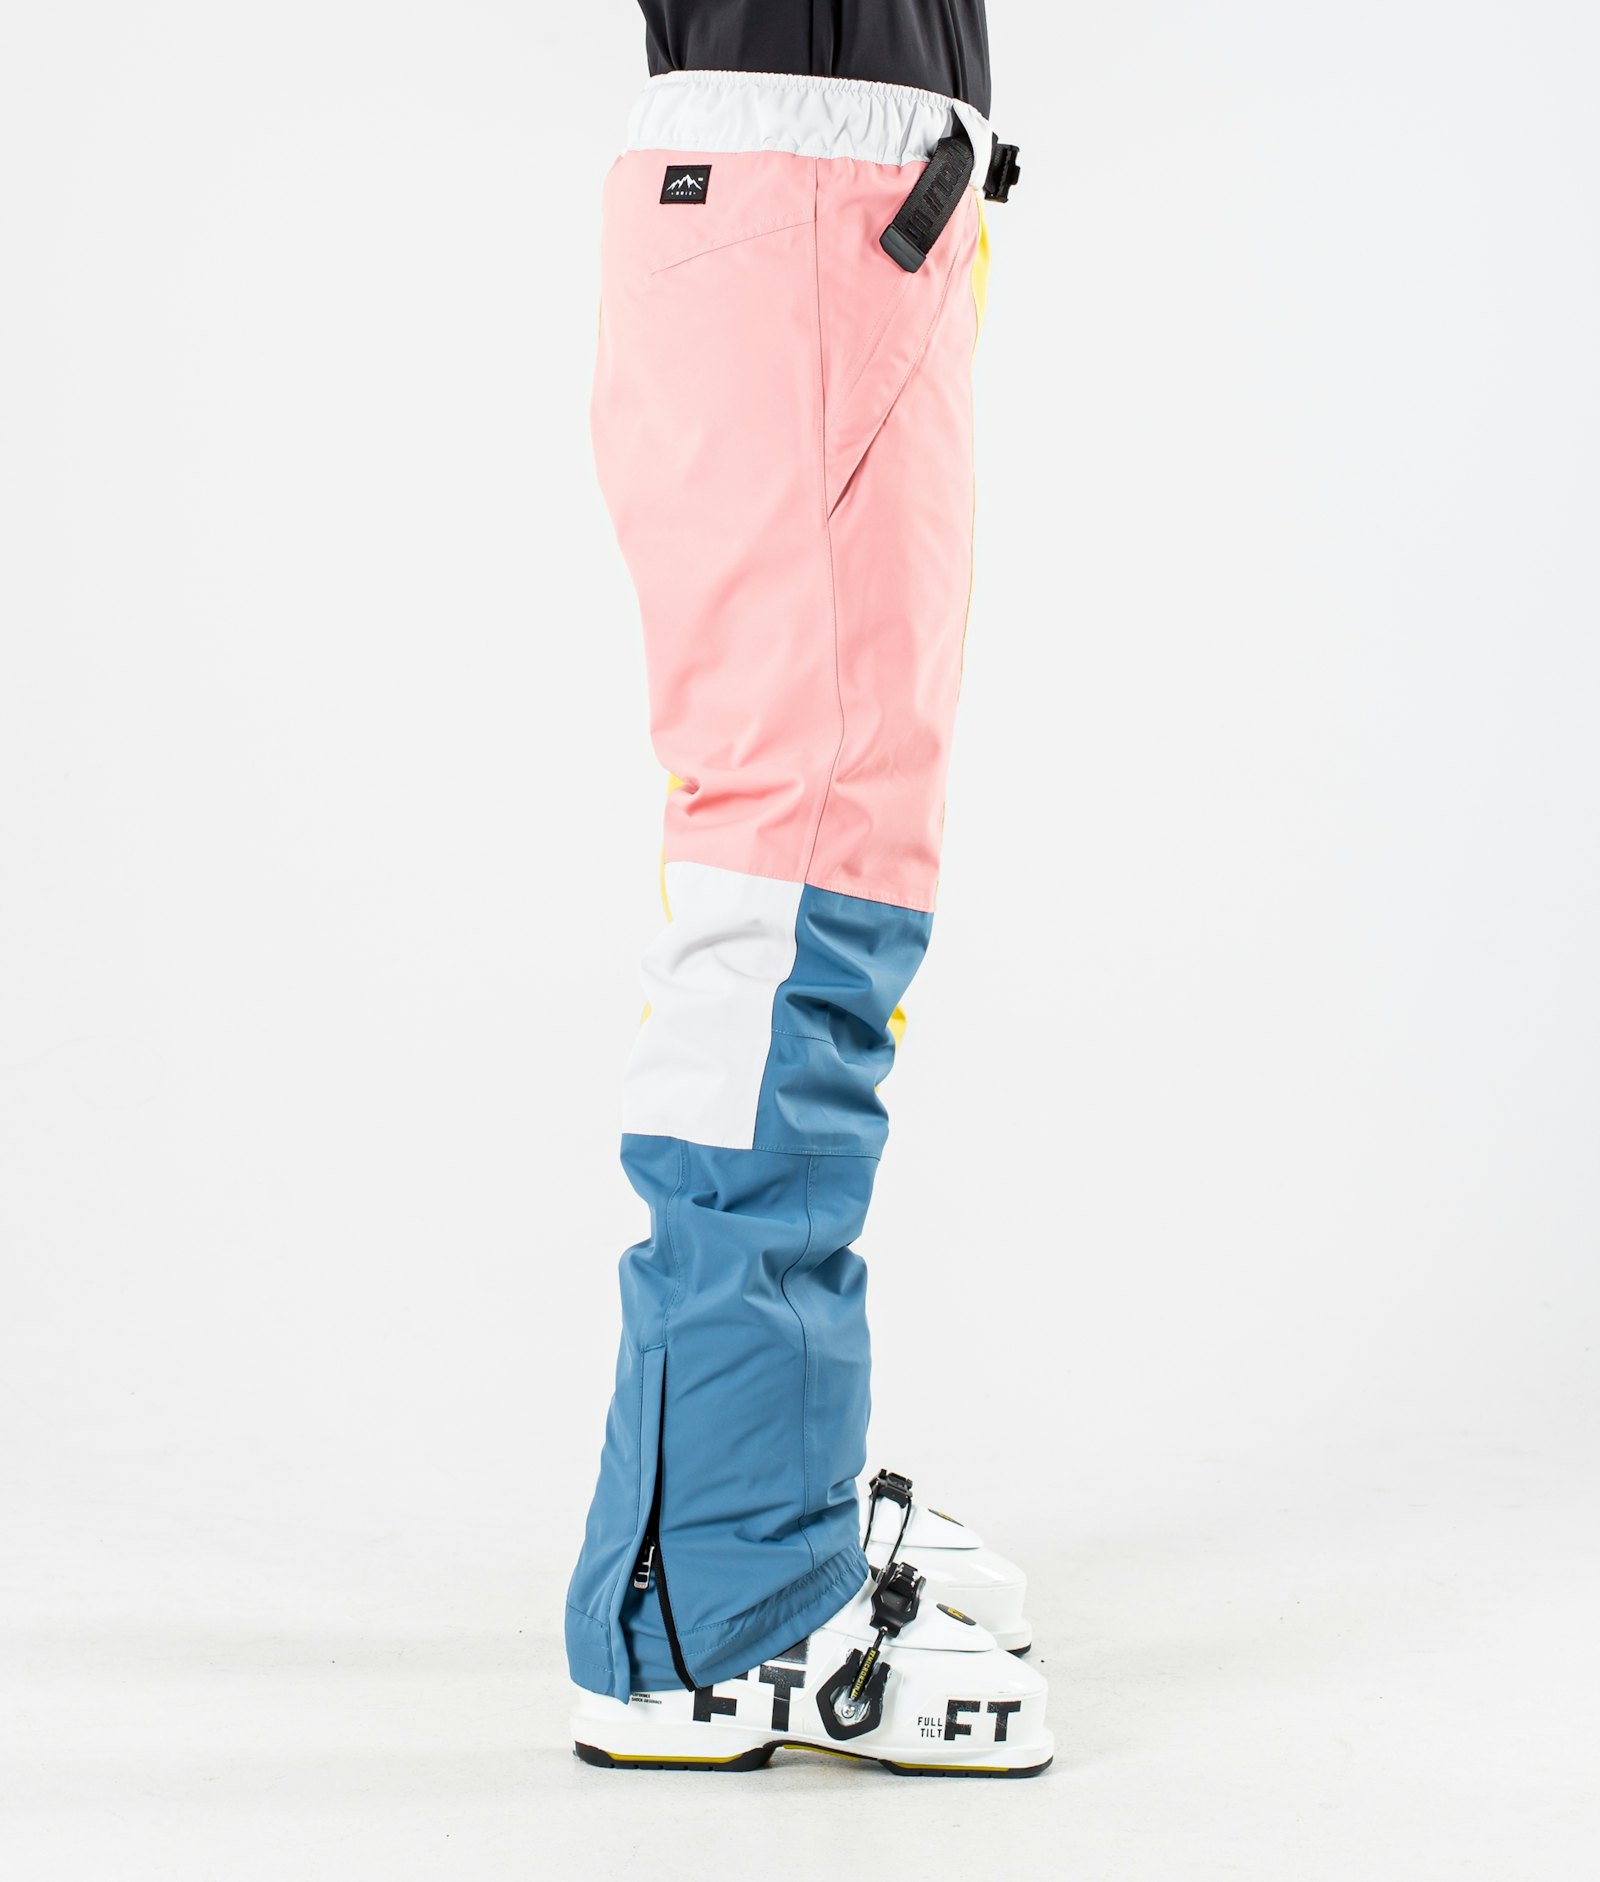 Dope Blizzard W Pantalones Esquí Mujer Soft Pink - Rosa